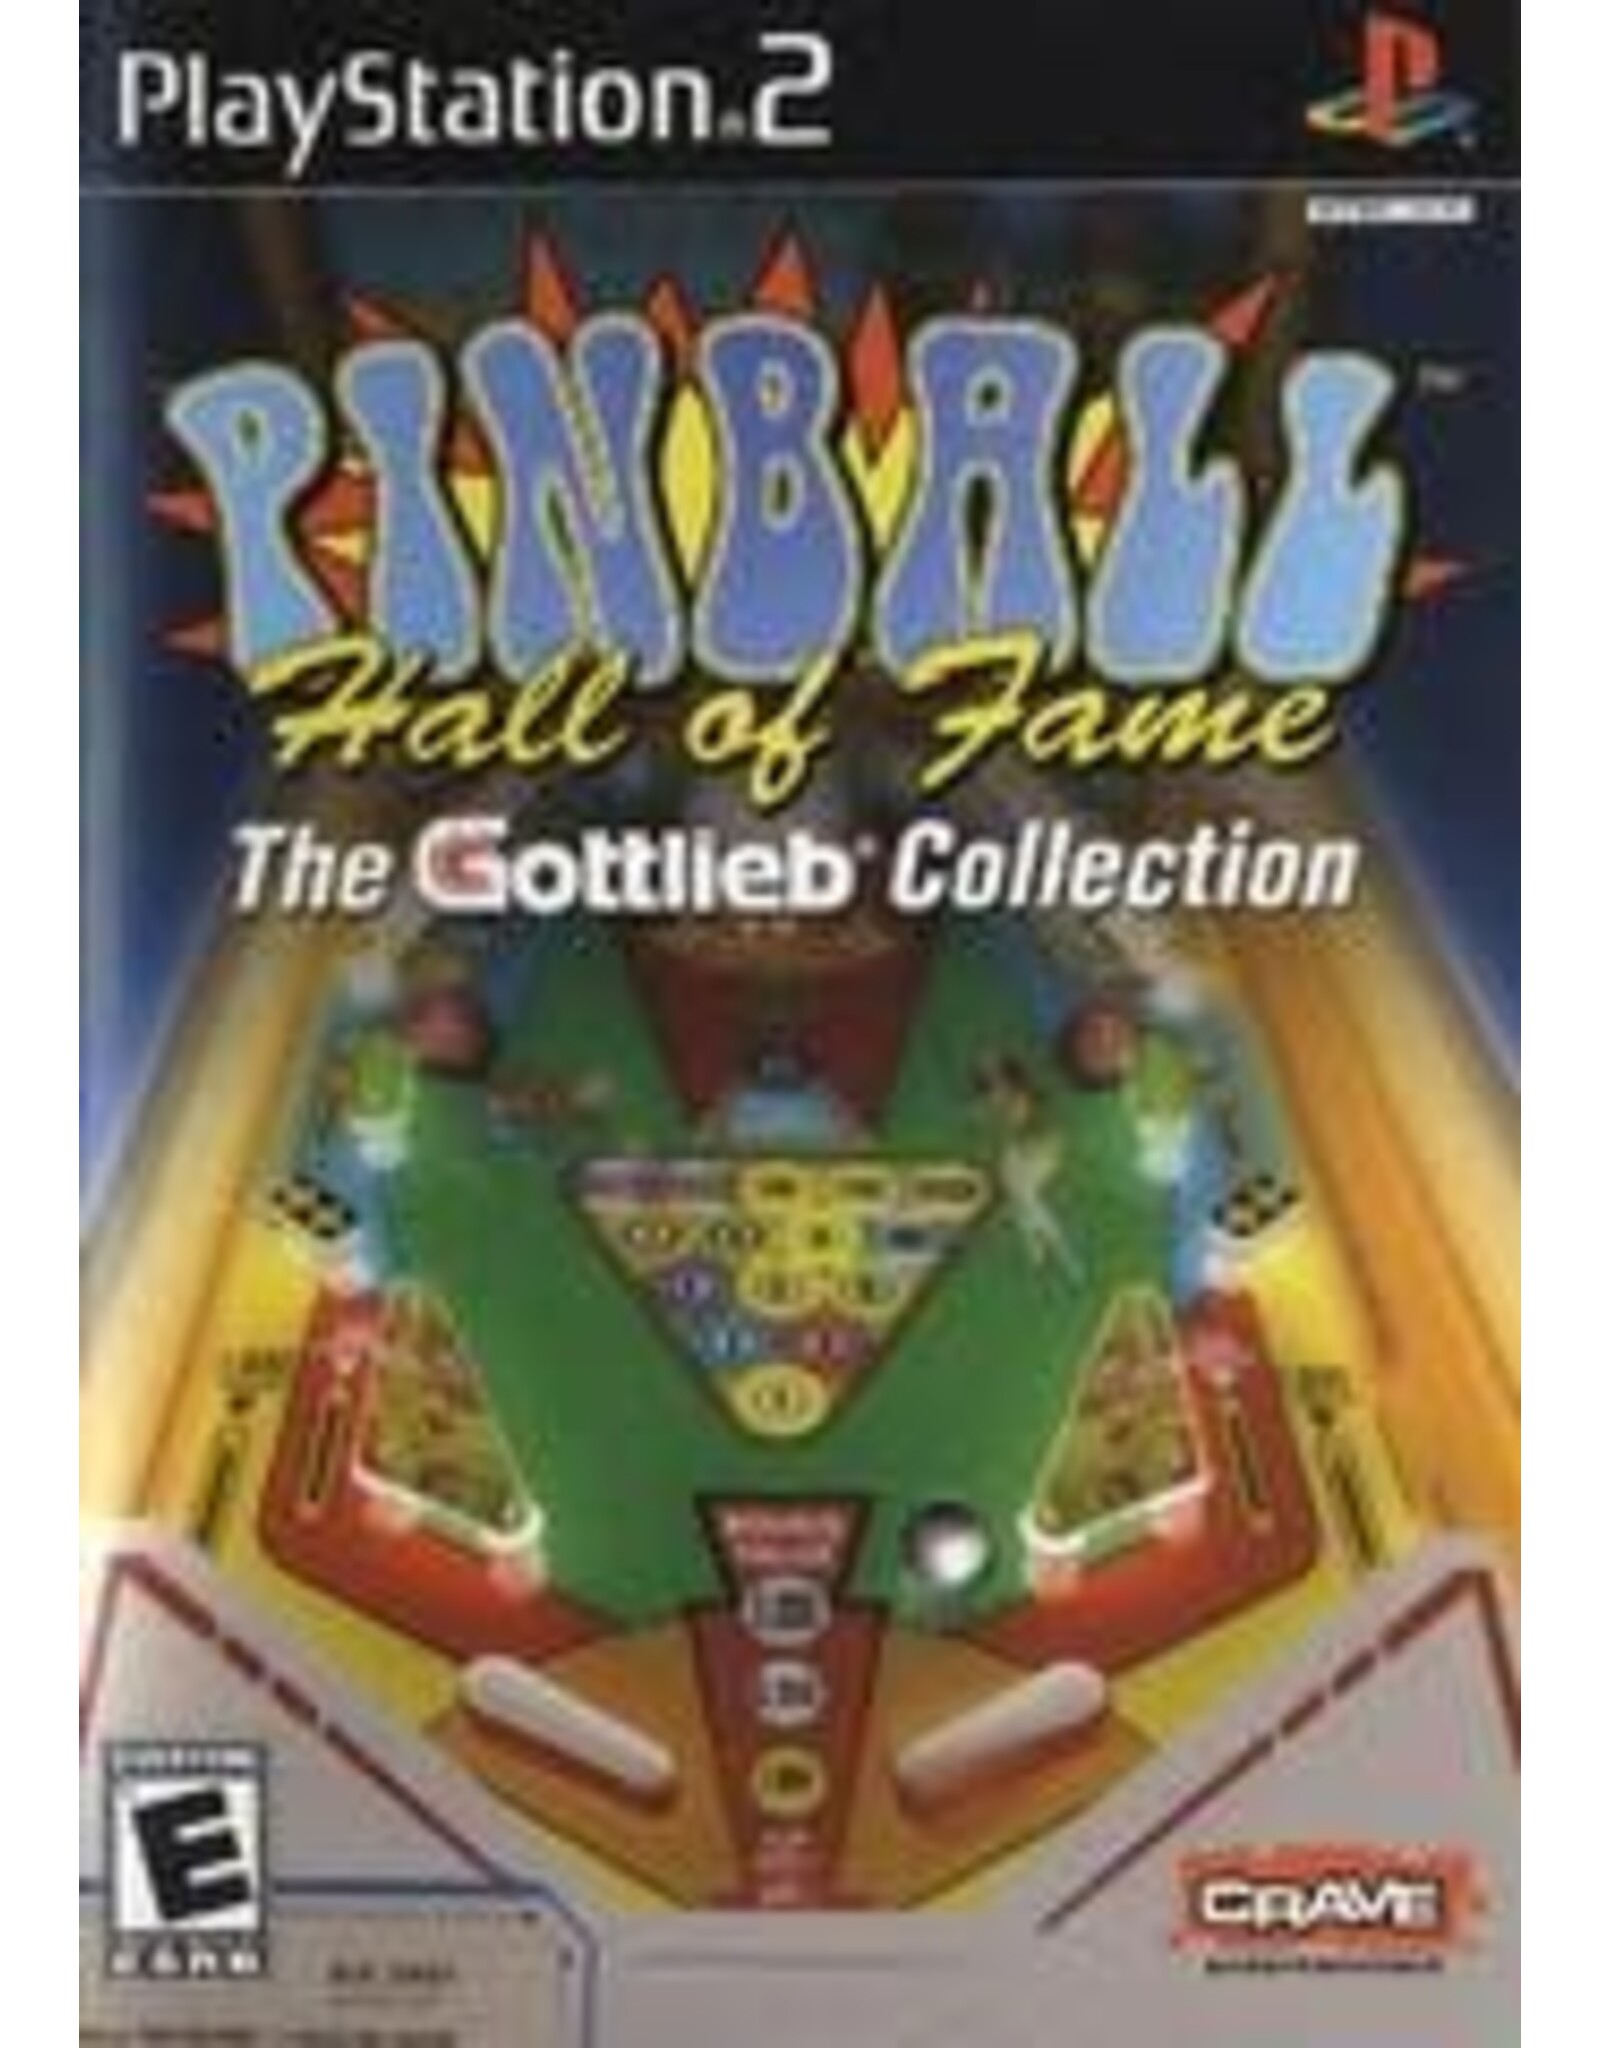 Playstation 2 Pinball Hall of Fame The Gottlieb Collection (No Manual)